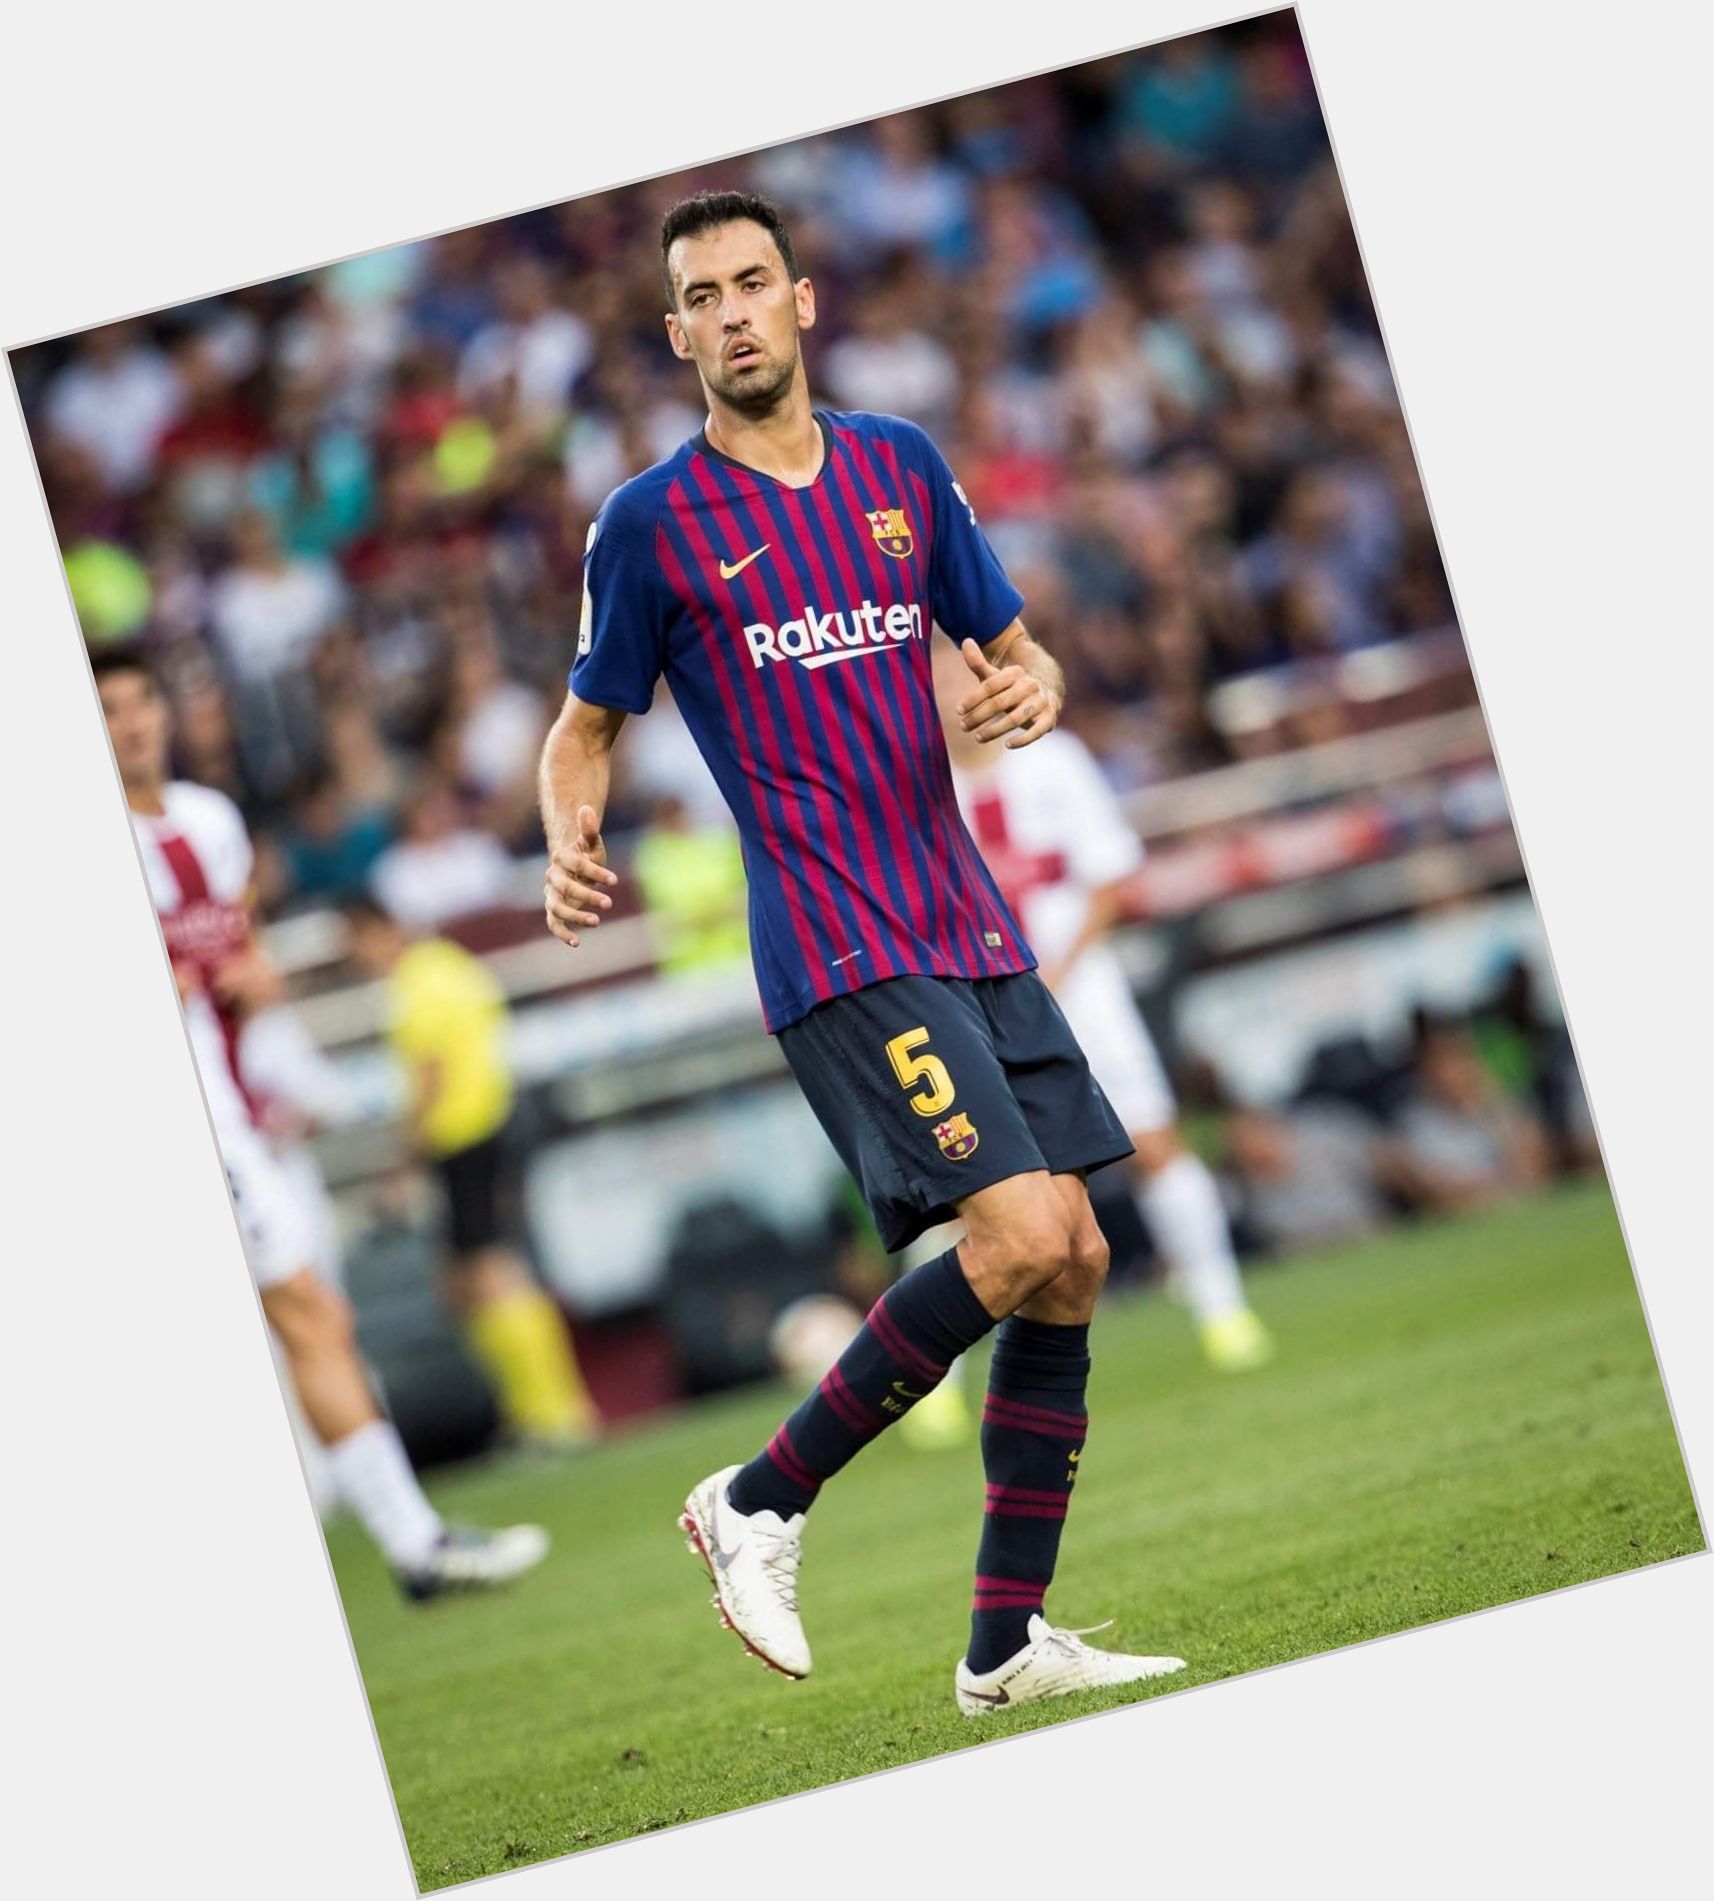 <a href="/hot-men/sergio-busquets/is-he-good-overrated-racist-dive-leaving-barcelona">Sergio Busquets</a> Athletic body,  dark brown hair & hairstyles